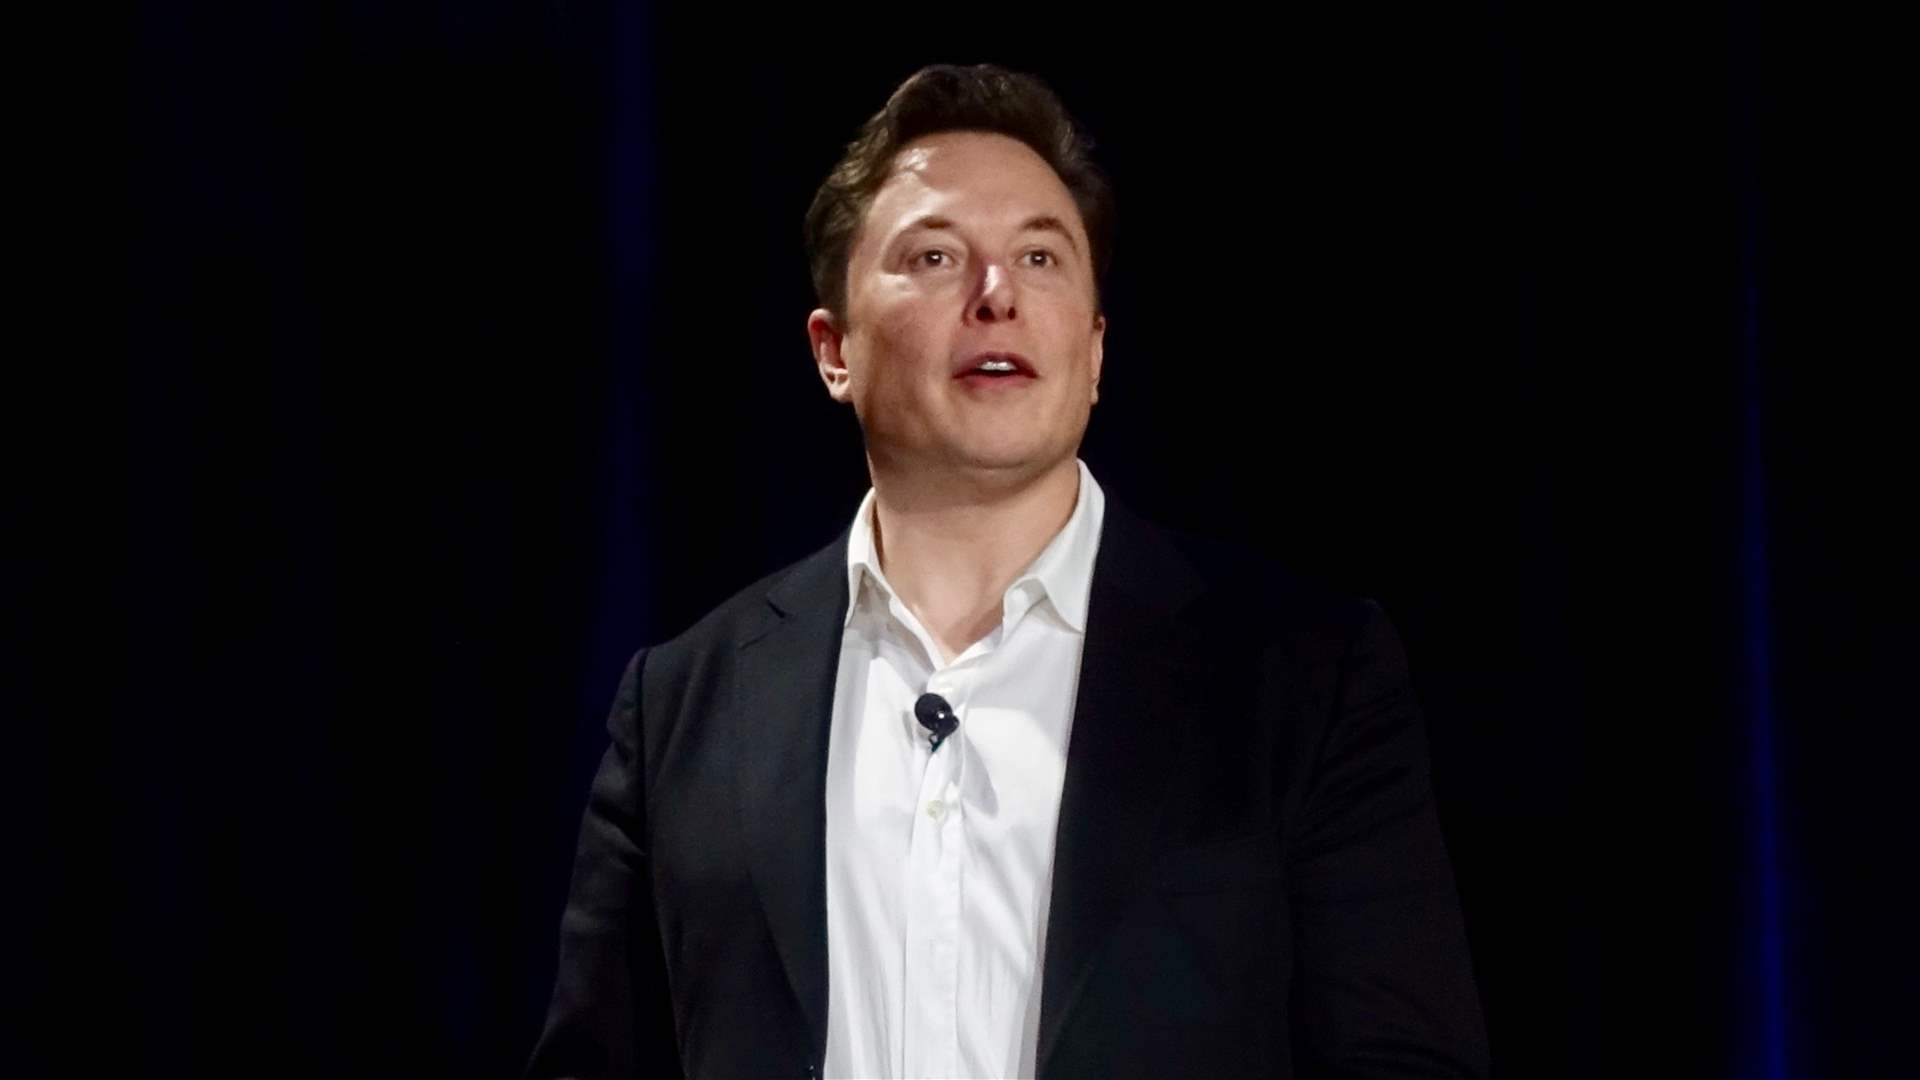 Musk offers to pay legal bills for users who faced problems because of posts on &quot;X&quot;